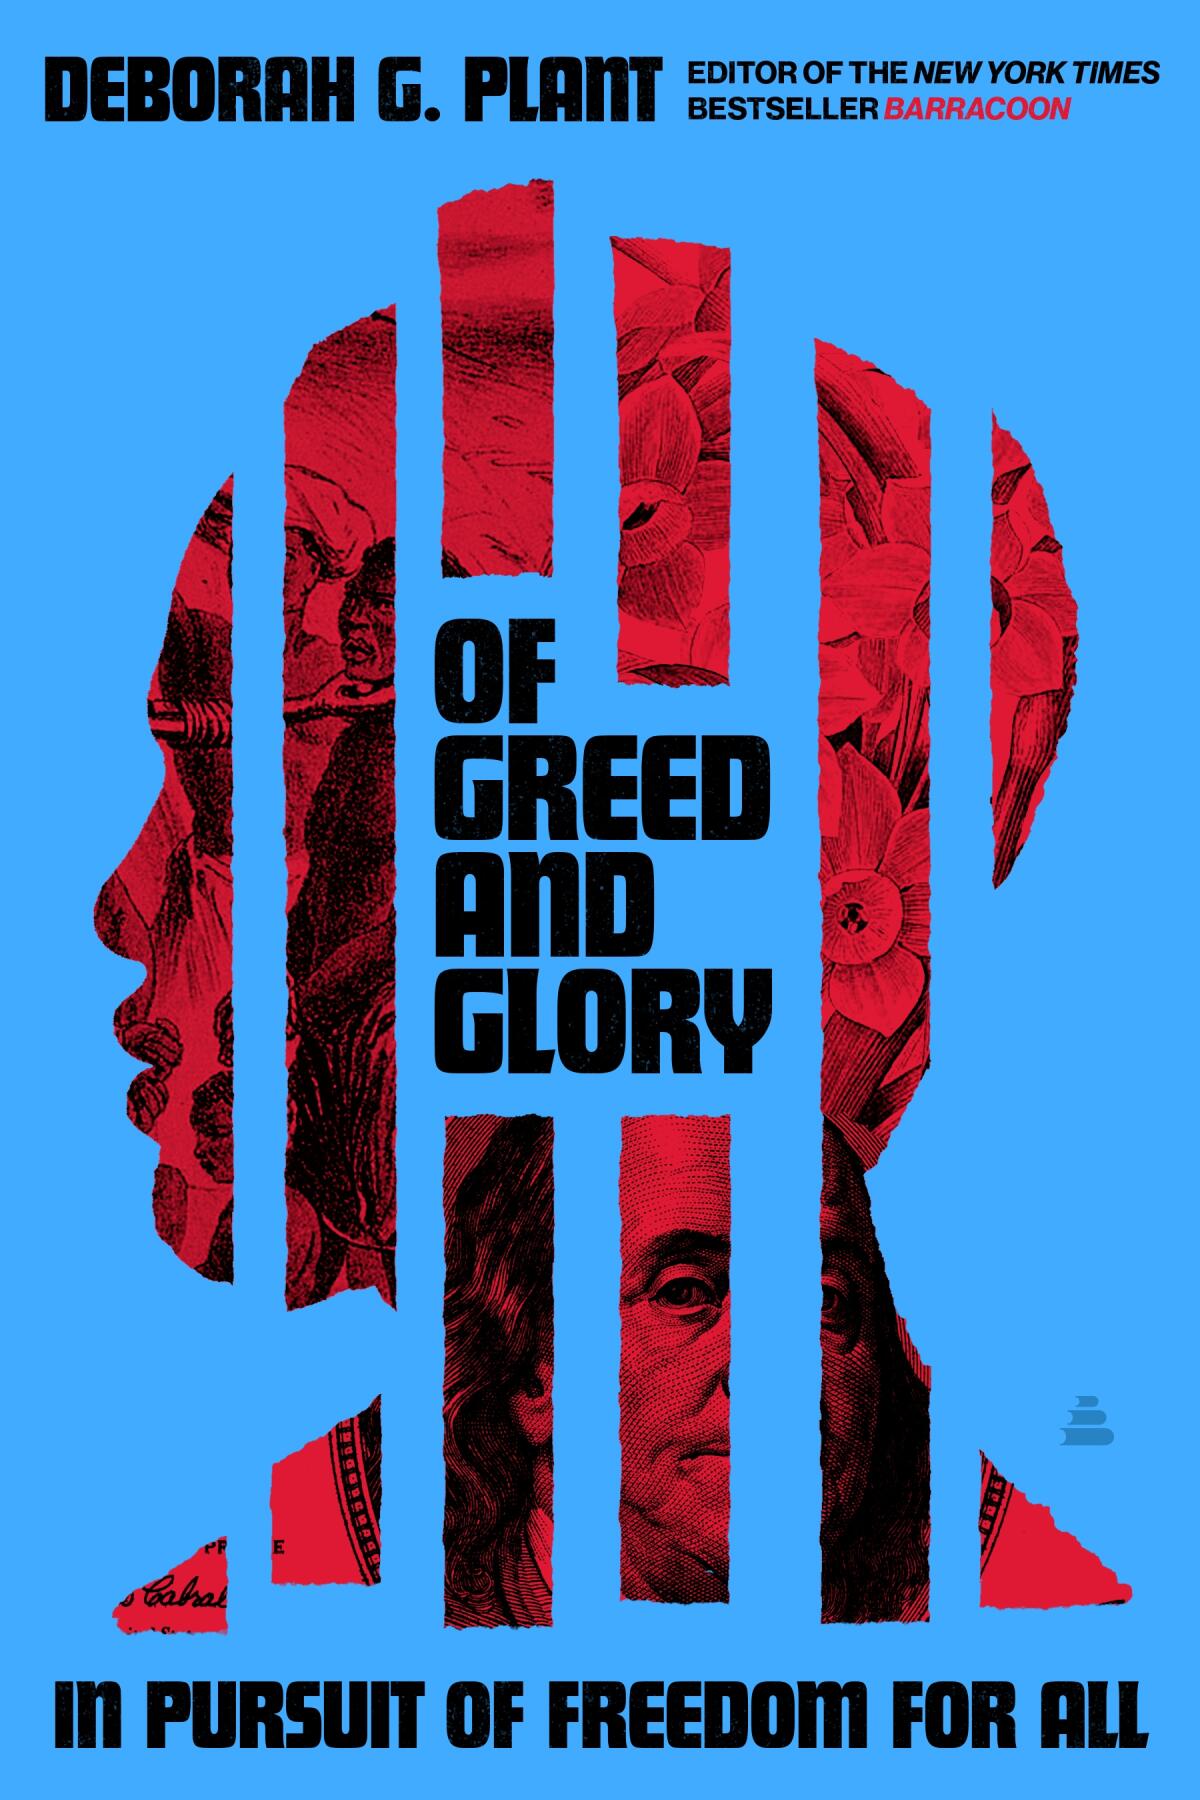 "Greed and Glory," by Deborah G. Plant